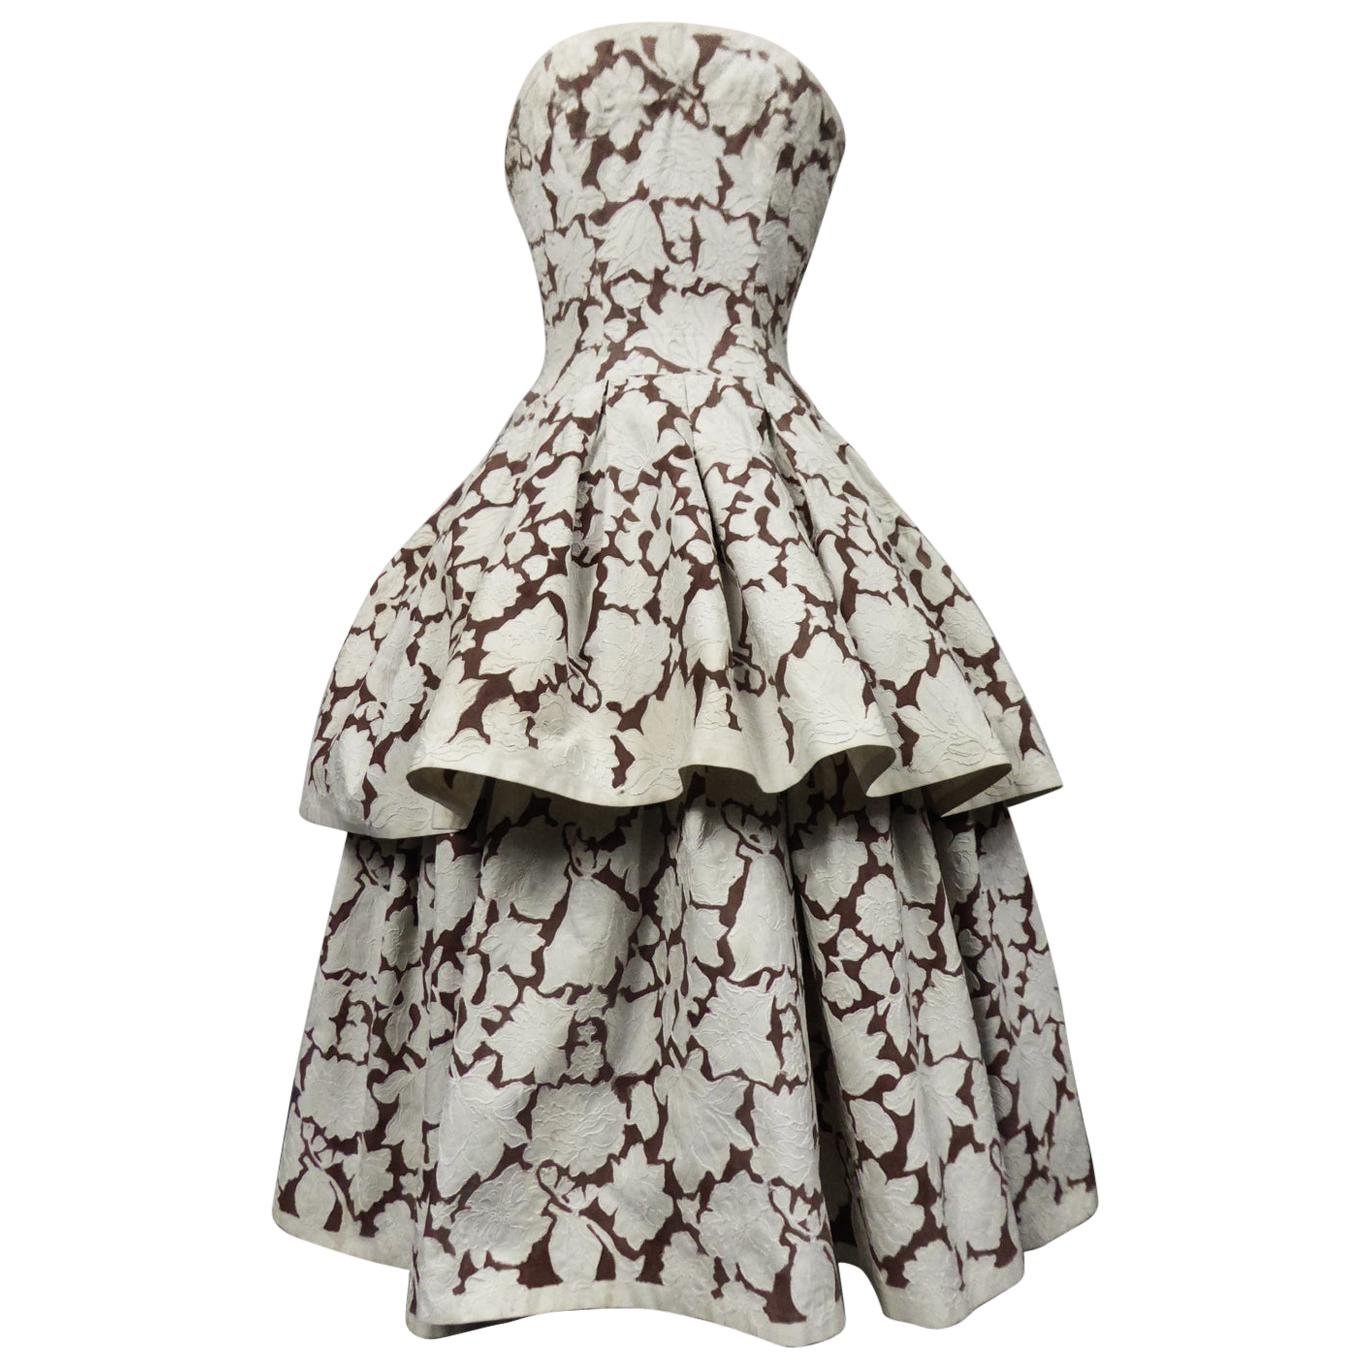 A Christian Dior Couture Ball-Gown Numbered 03683 Circa 1954/1957